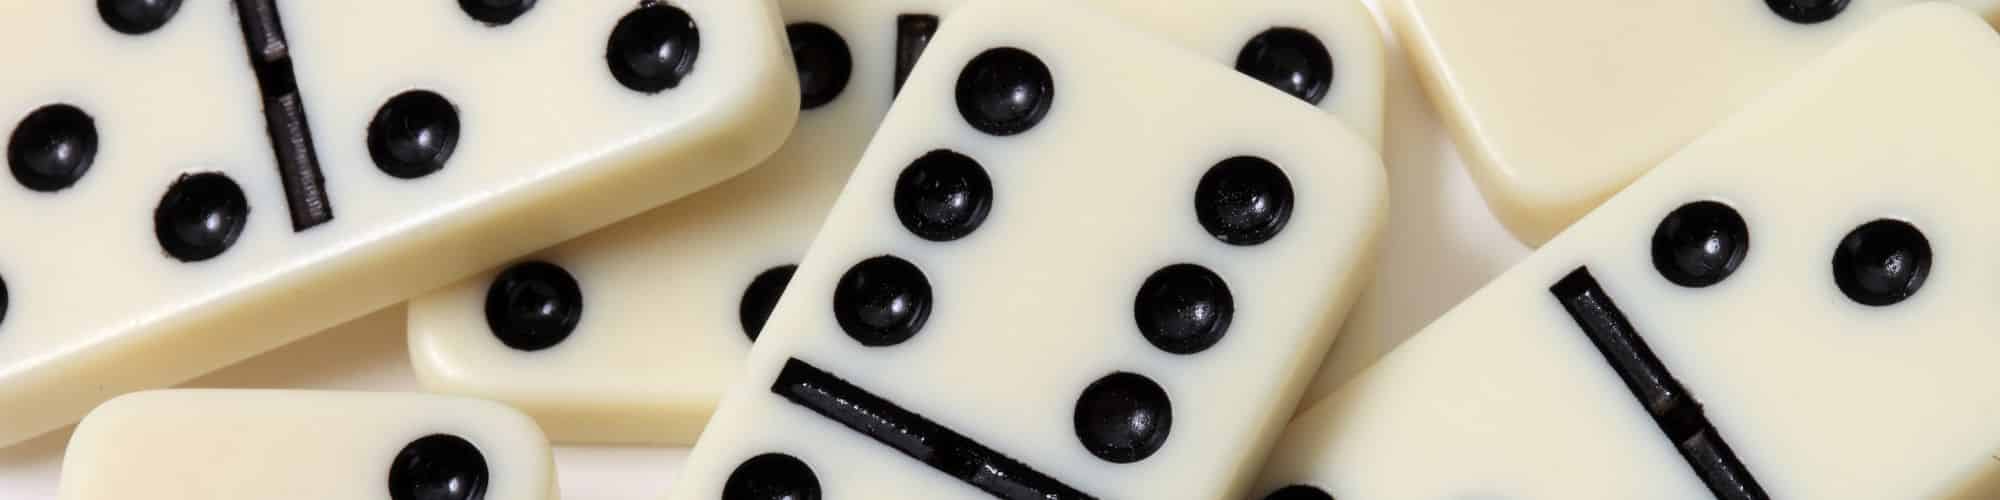 A close up on a pile of dominos